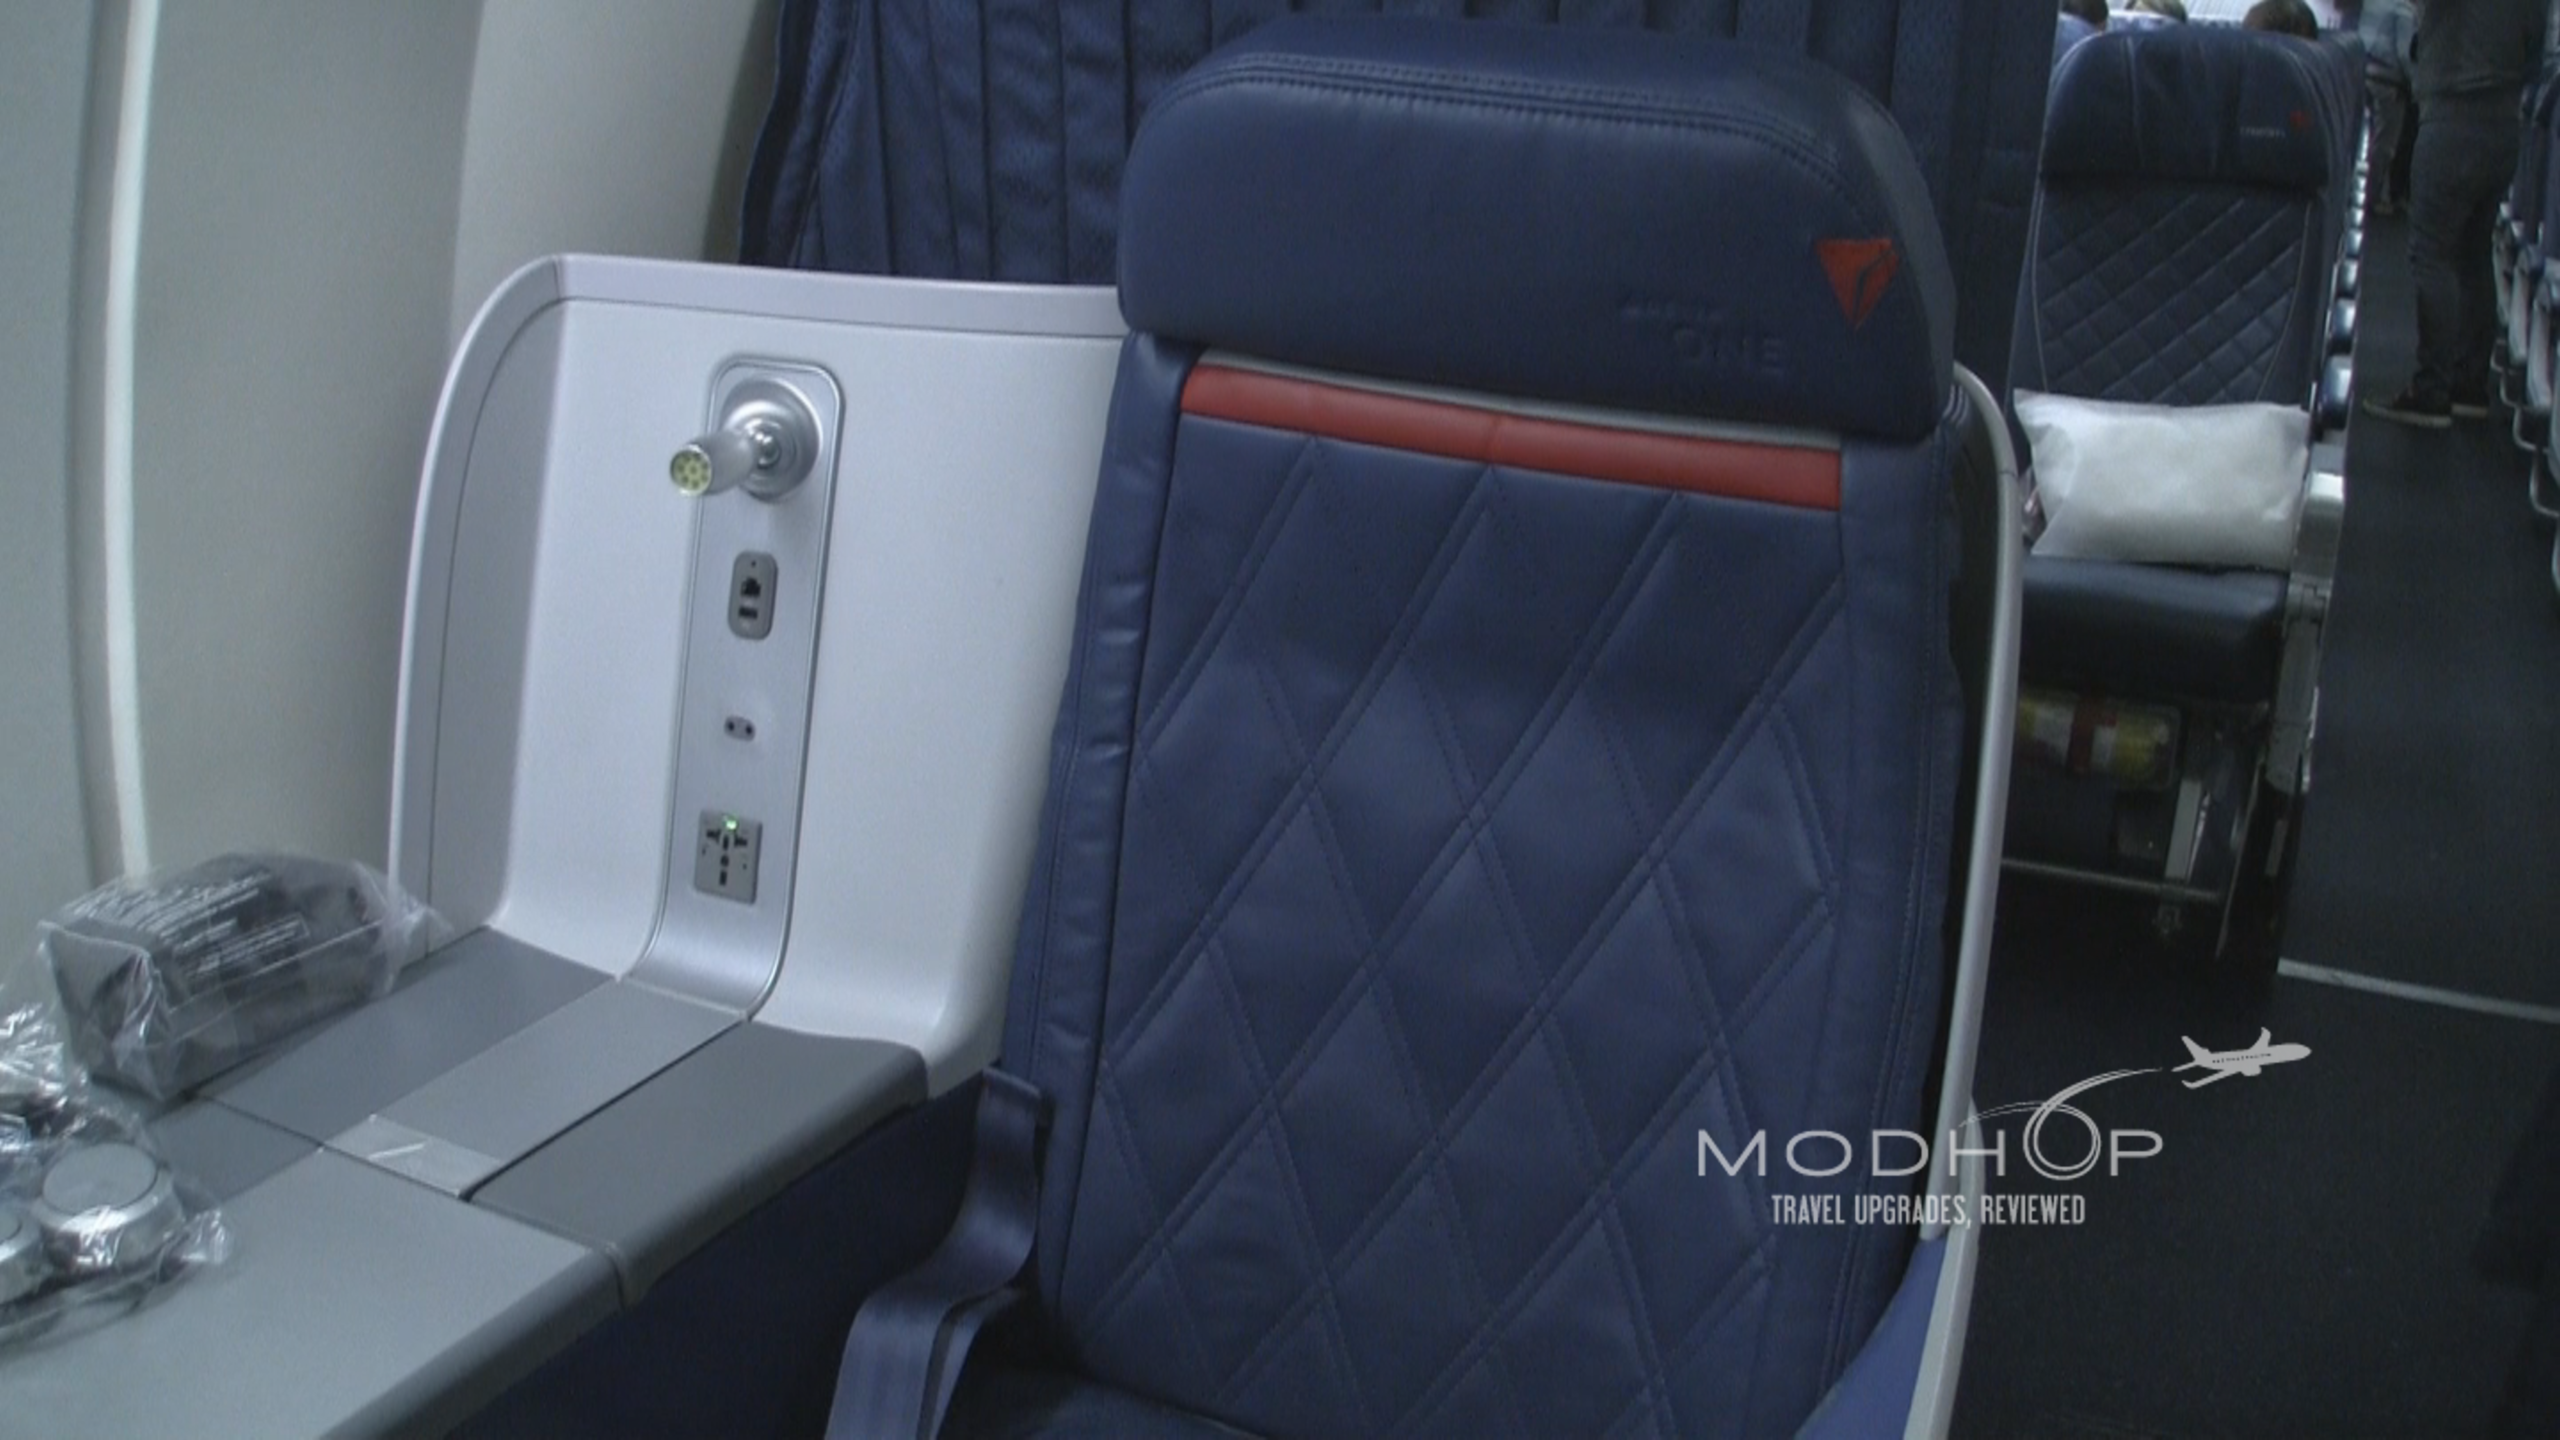 Room to move in Delta One seats 